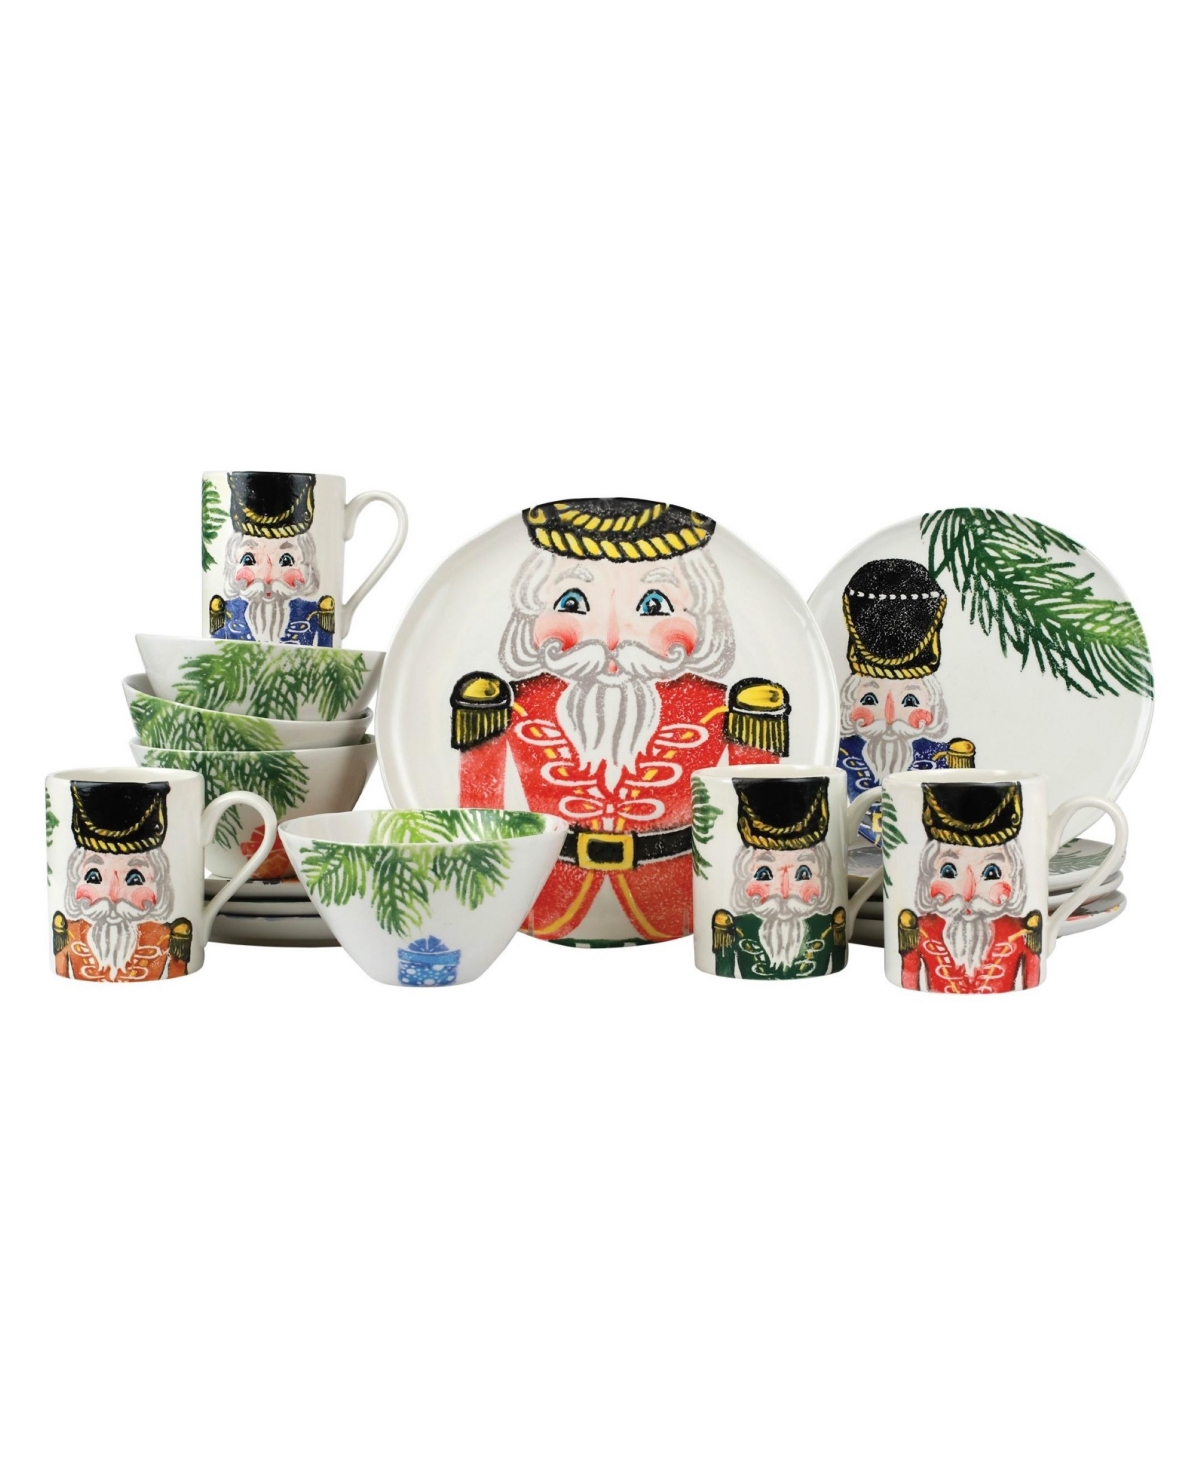 Nutcrackers 16 Pc Dinnerware Set, Service for 4 - Assorted